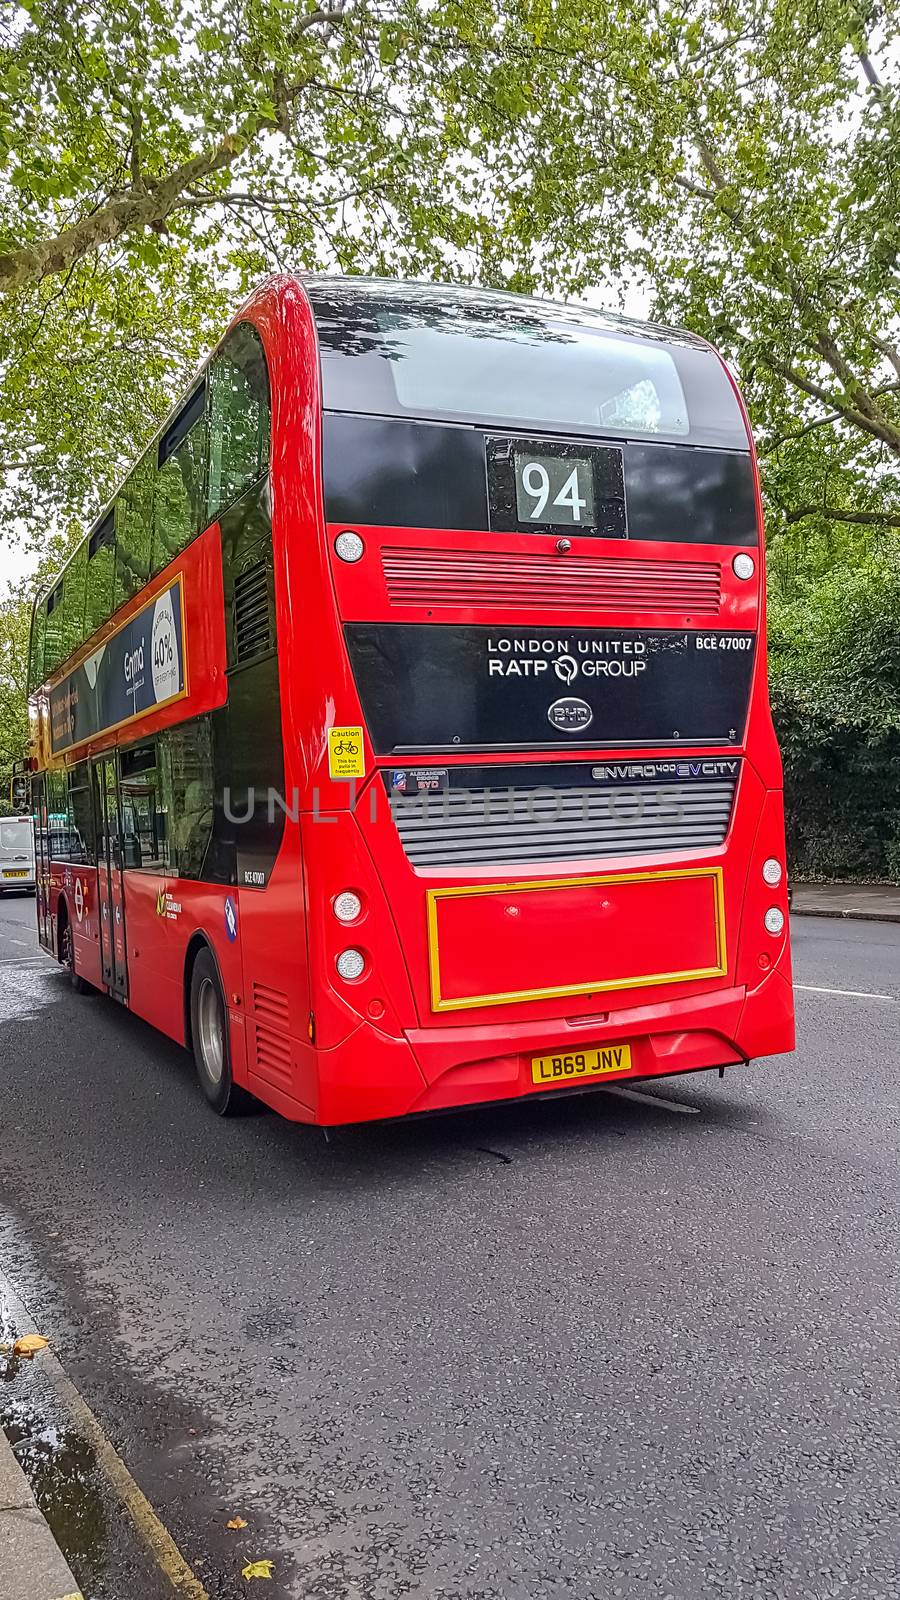 London, UK - July 8, 2020: Modern red double-decker bus is waiting for people in central London. Bus 94.